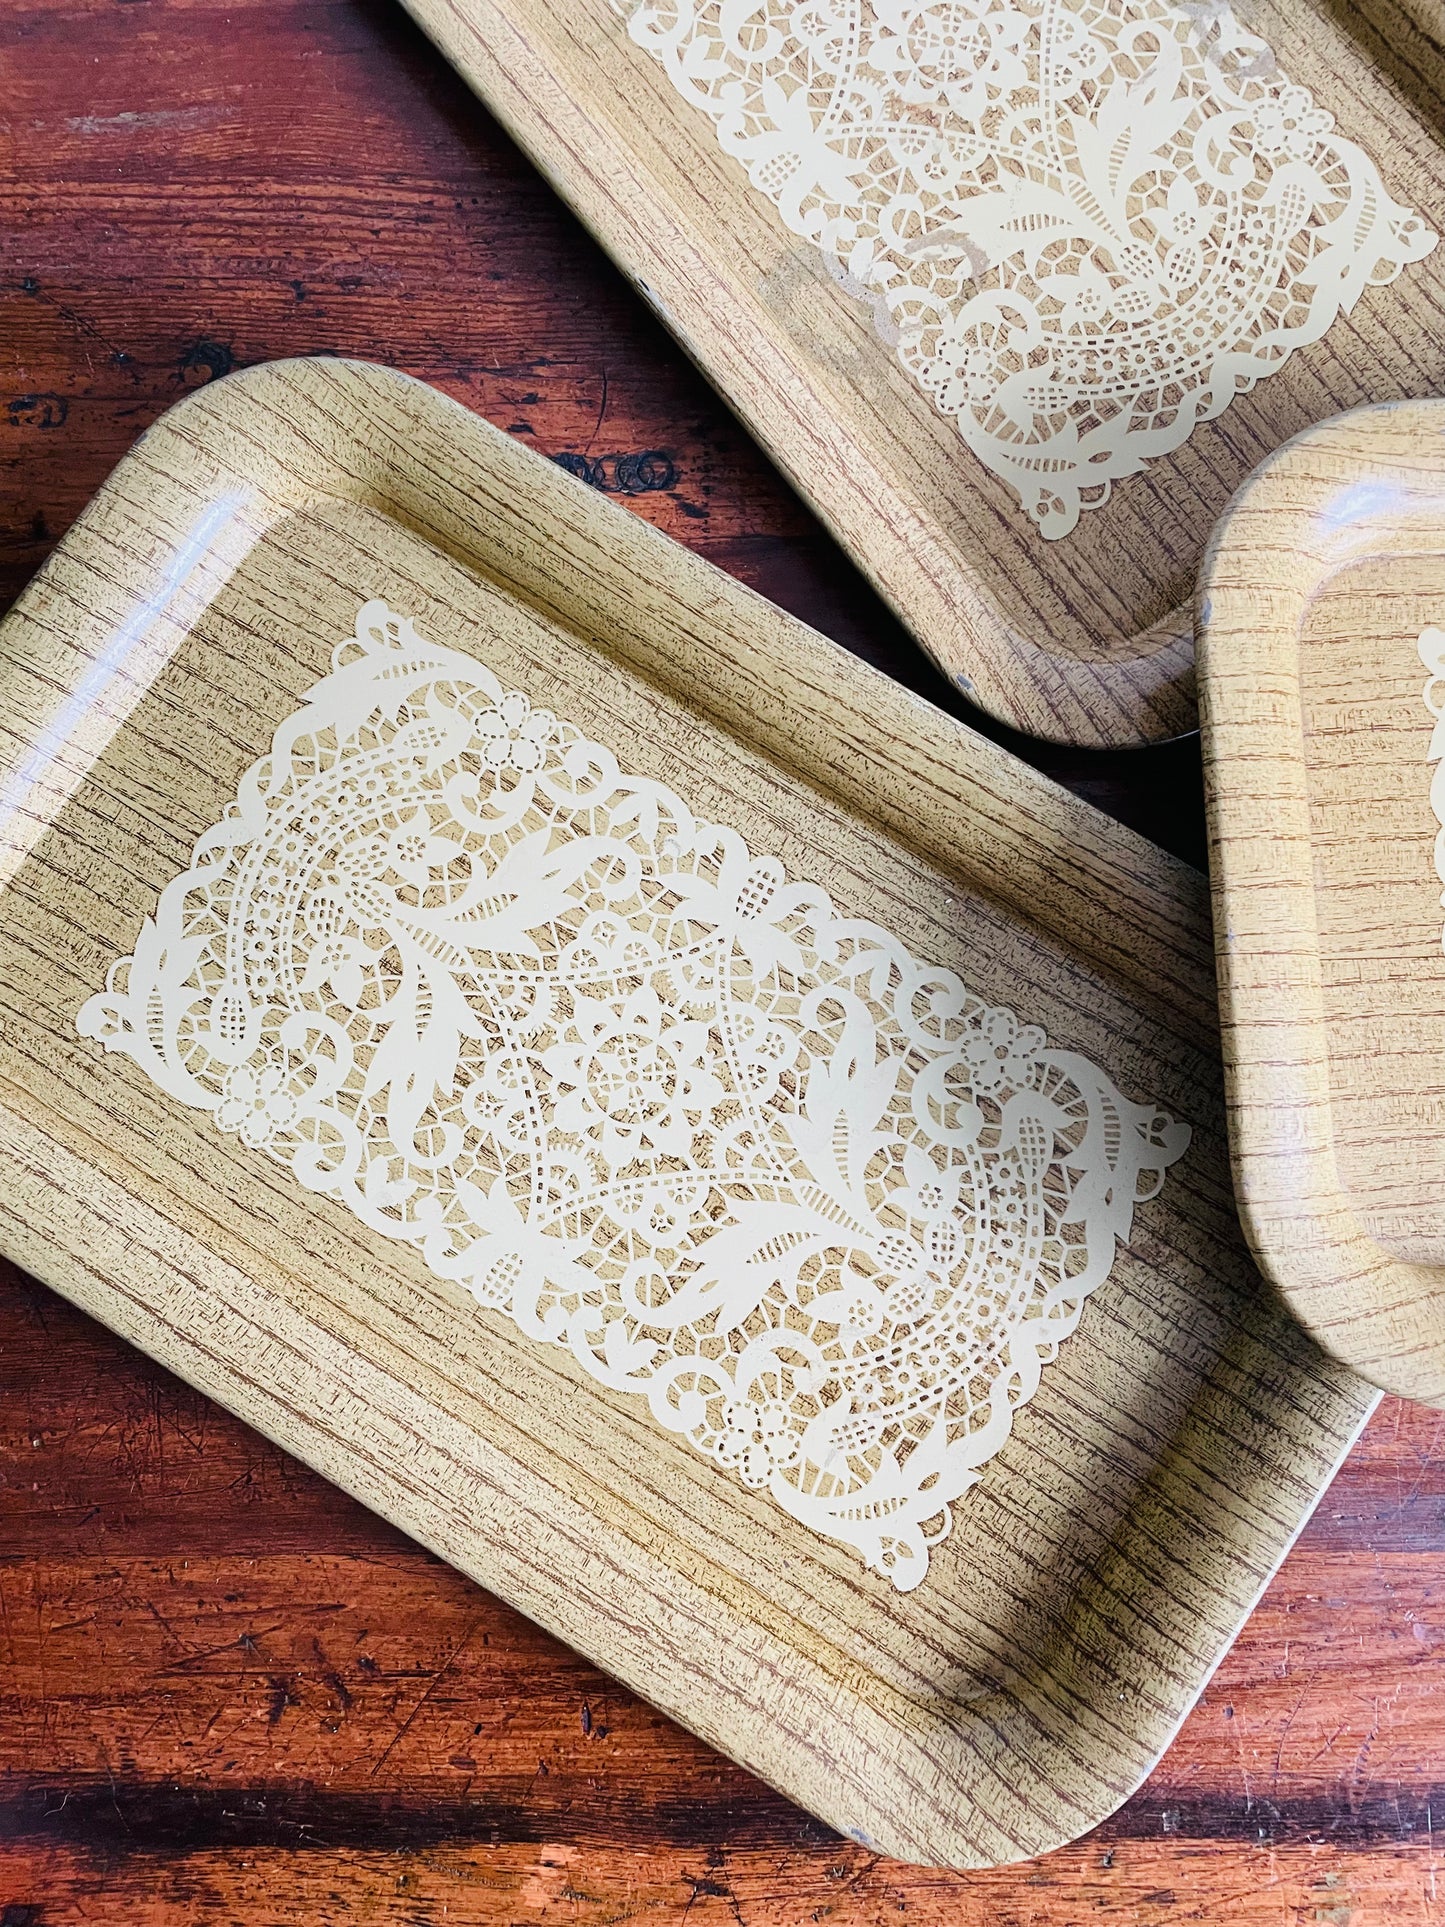 Faux Wood & Doily Design Tin Metal Individual Serving Trays - Set of 4